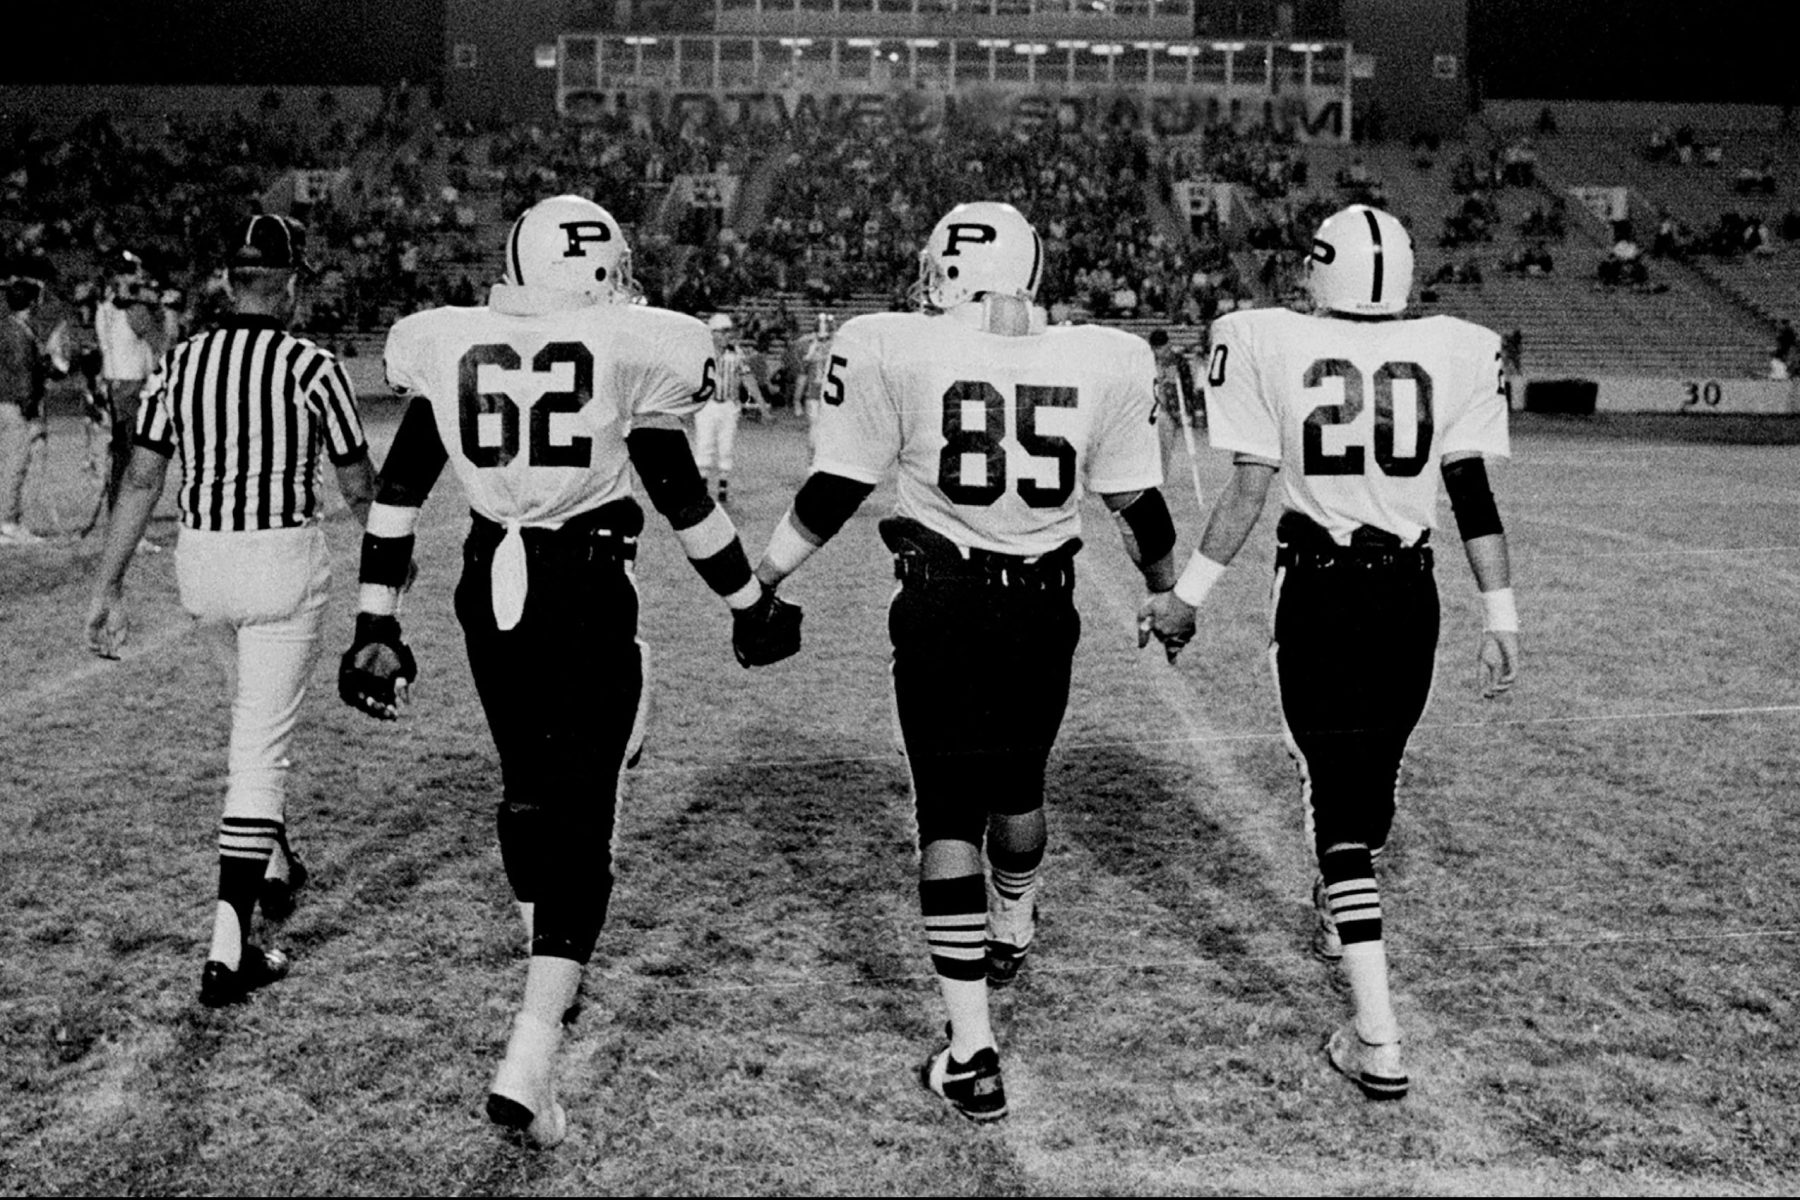 <p>Nearly two decades before America met Coach Taylor, Tyra Collette and Tim Riggins thanks to a TV series on NBC, author Buzz <span style="font-weight: 400">Bissinger shone a spotlight on the world of Texas high school football in </span><span style="font-weight: 400"><em><a href="https://bookshop.org/books/friday-night-lights-a-town-a-team-and-a-dream-anniversary/9780306824203">Friday Night Lights: A Town, a Team, and a Dream</a>. </em></span>The photography for the<span style="font-weight: 400"> book, which chronicles the </span>1988 season of the Permian High School Panthers football team in Odessa, Texas, was shot by Robert Clark, then in his early 20s.</p>
<p>Although Bissinger only published about 20 of the photos, Clark shot 137 rolls of film while he was in Texas, and has used some of those photographs in his book <em><a href="https://bookshop.org/books/friday-night-lives-photos-from-the-town-the-team-and-after/9781477321195">Friday Night Lives</a>, </em>a collection of never-before-seen images from his time embedded with the Panthers. <span style="font-weight: 400">“Looking back at these kids, I wasn't that much older than them at the time. And I remembered my time as a high school athlete and things,” Clark tells InsideHook. “I think I drew upon those experiences to help me shoot this successfully.”</span></p>
<p>After catching up with Clark last year, we asked him to fill us in on the back-stories that attend a dozen pictures from the book. Here's what he told us. </p>